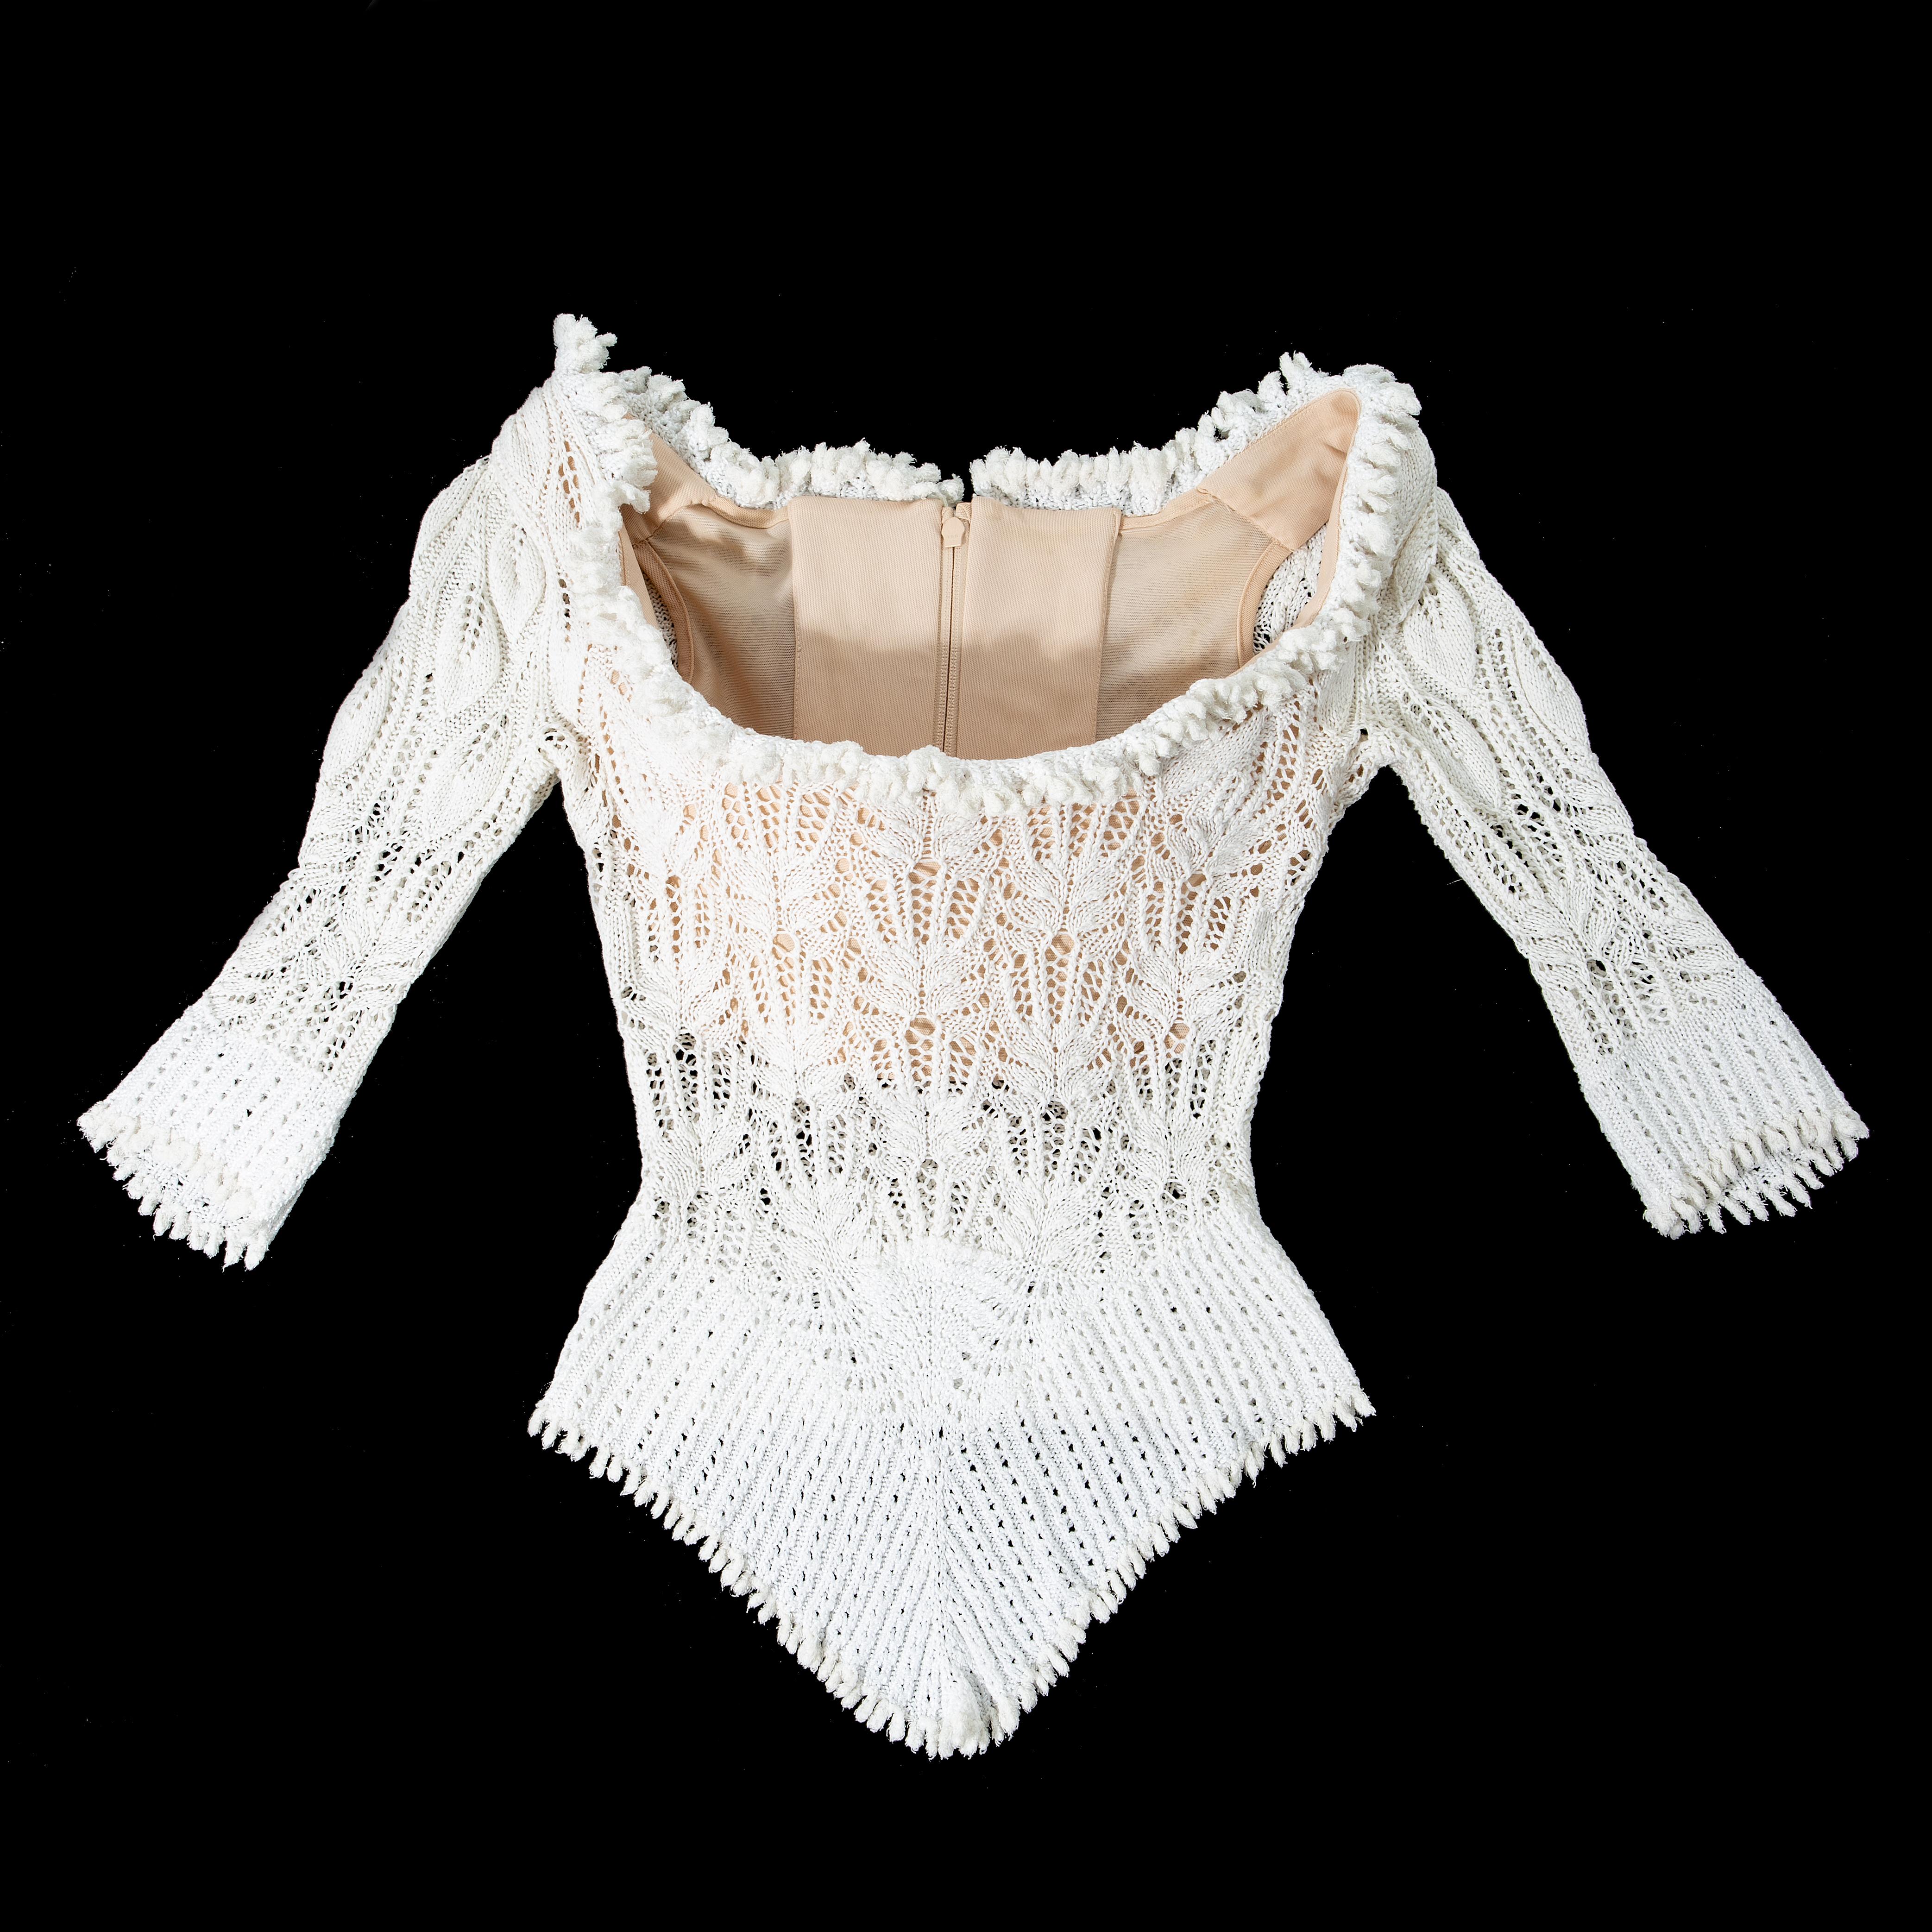 Vivienne Westwood white lace knit corset with wide neckline and fringed trim. Built in corset designed to cinch the waist and push the breasts up.

Spring-Summer 1994